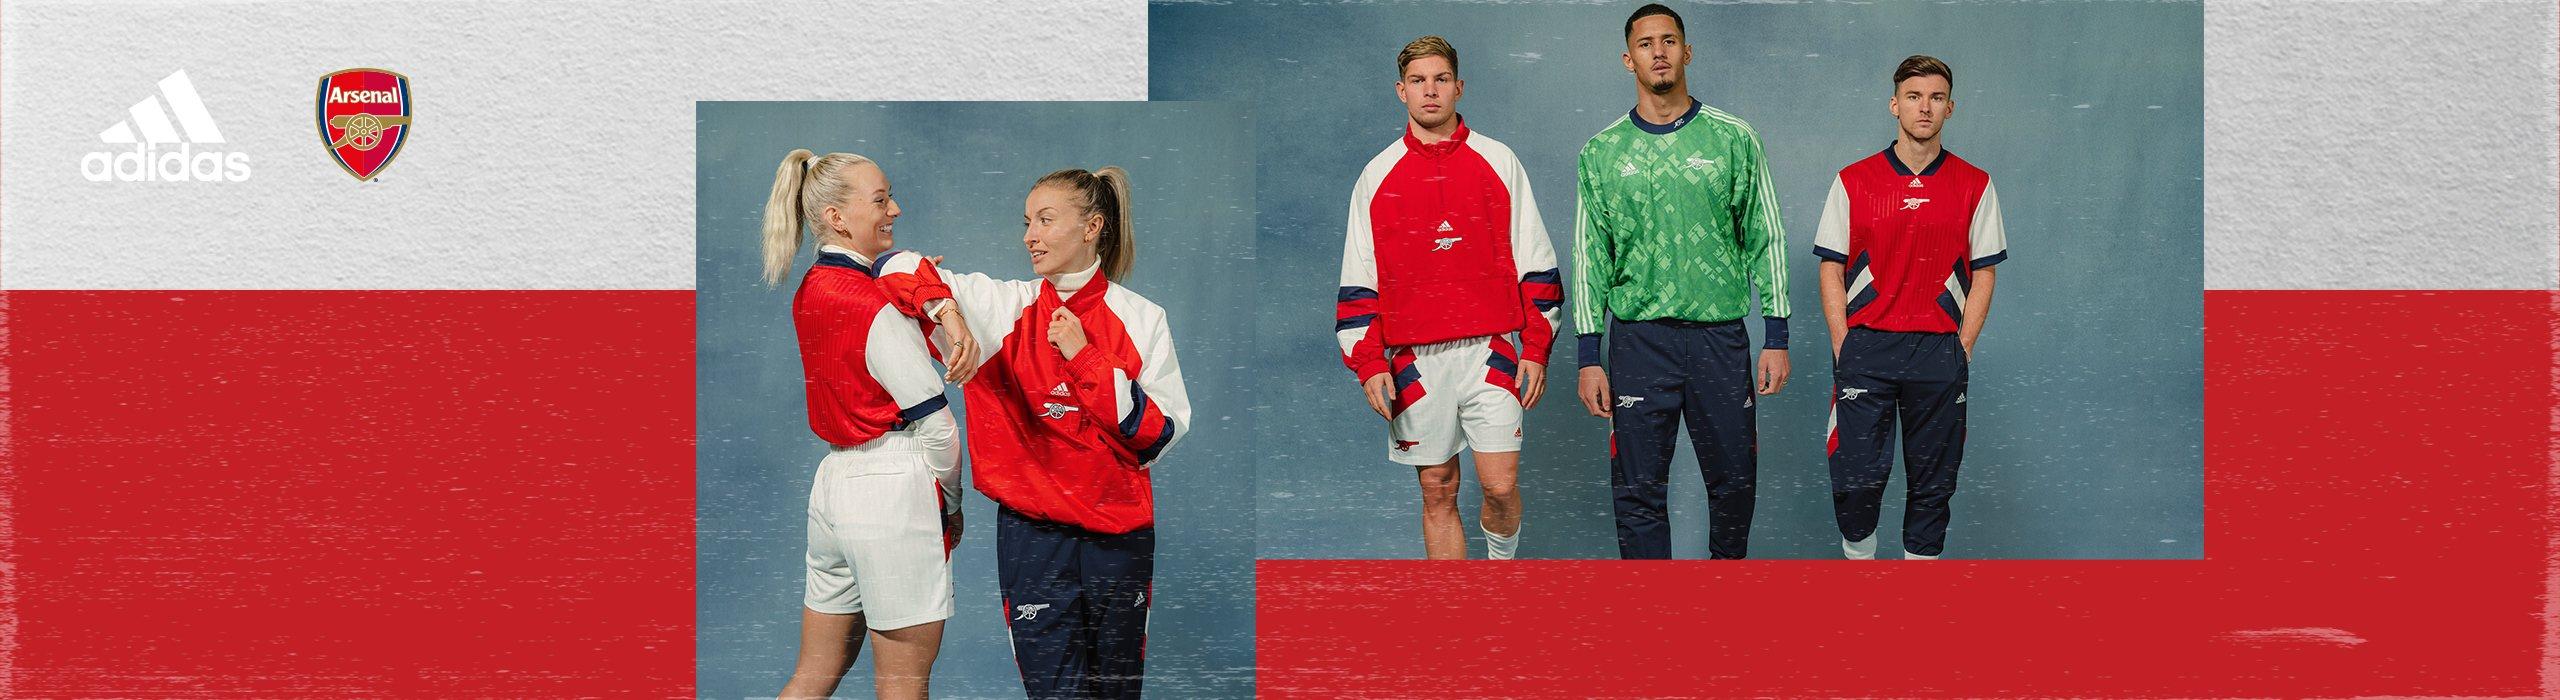 Arsenal's retro adidas commercials: which one is the best? - The Short Fuse